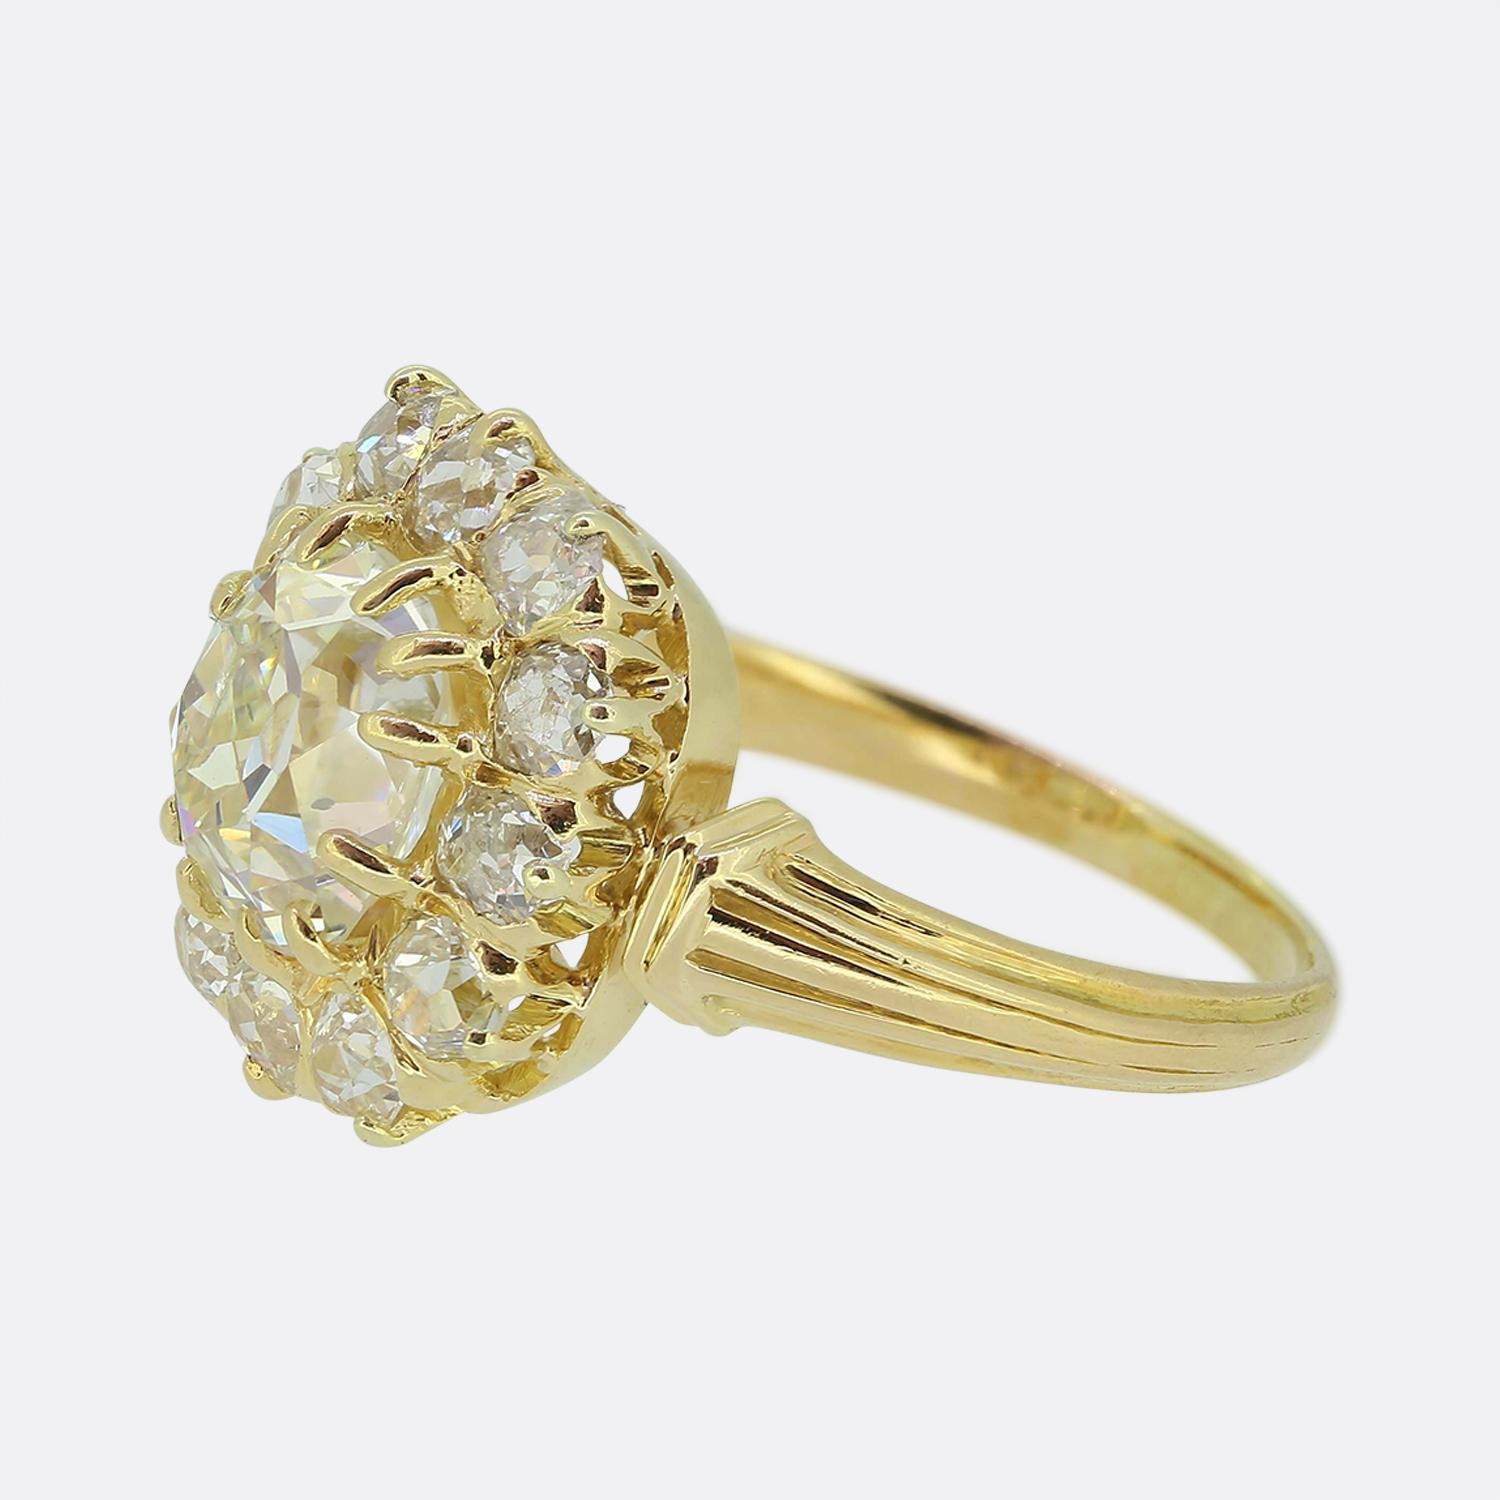 Here we have a scintillating diamond cluster ring taken from the Victorian era. This antique piece has been crafted from a rich 18ct yellow gold and features an impressive 2.00ct old cushion cut diamond at the centre of the face. This chunky